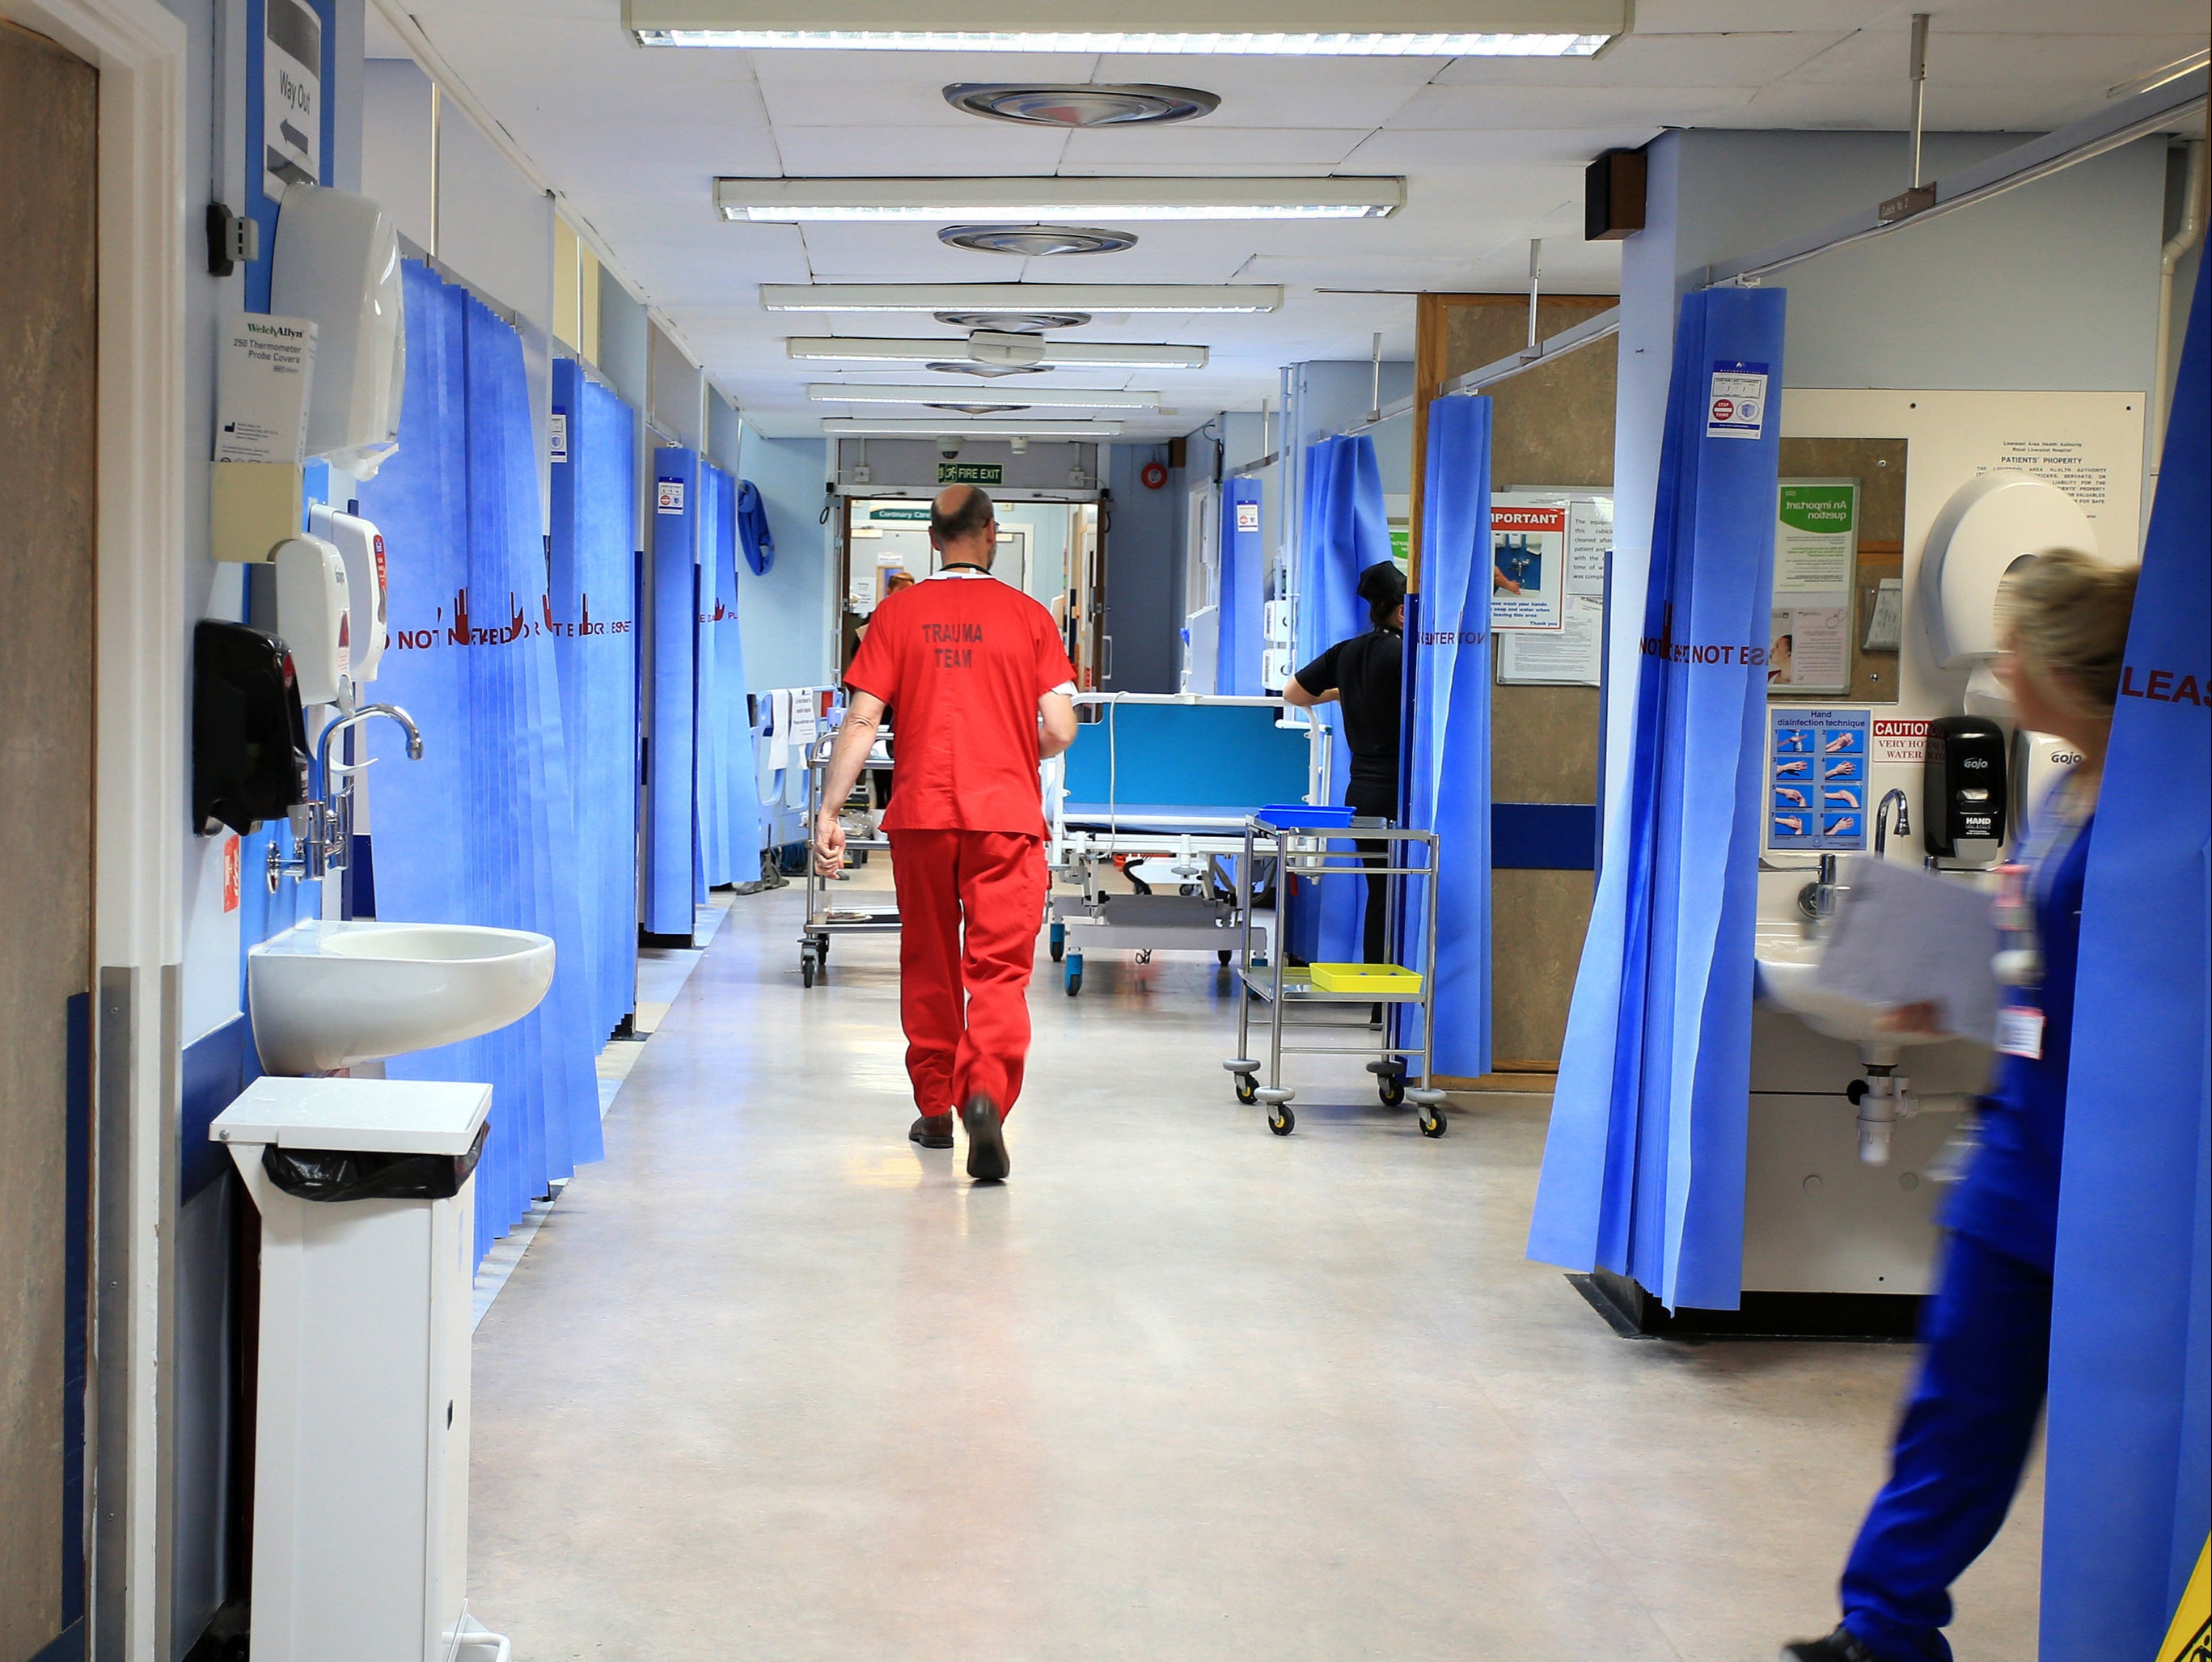 The NHS has faced a number of challenges during the past year